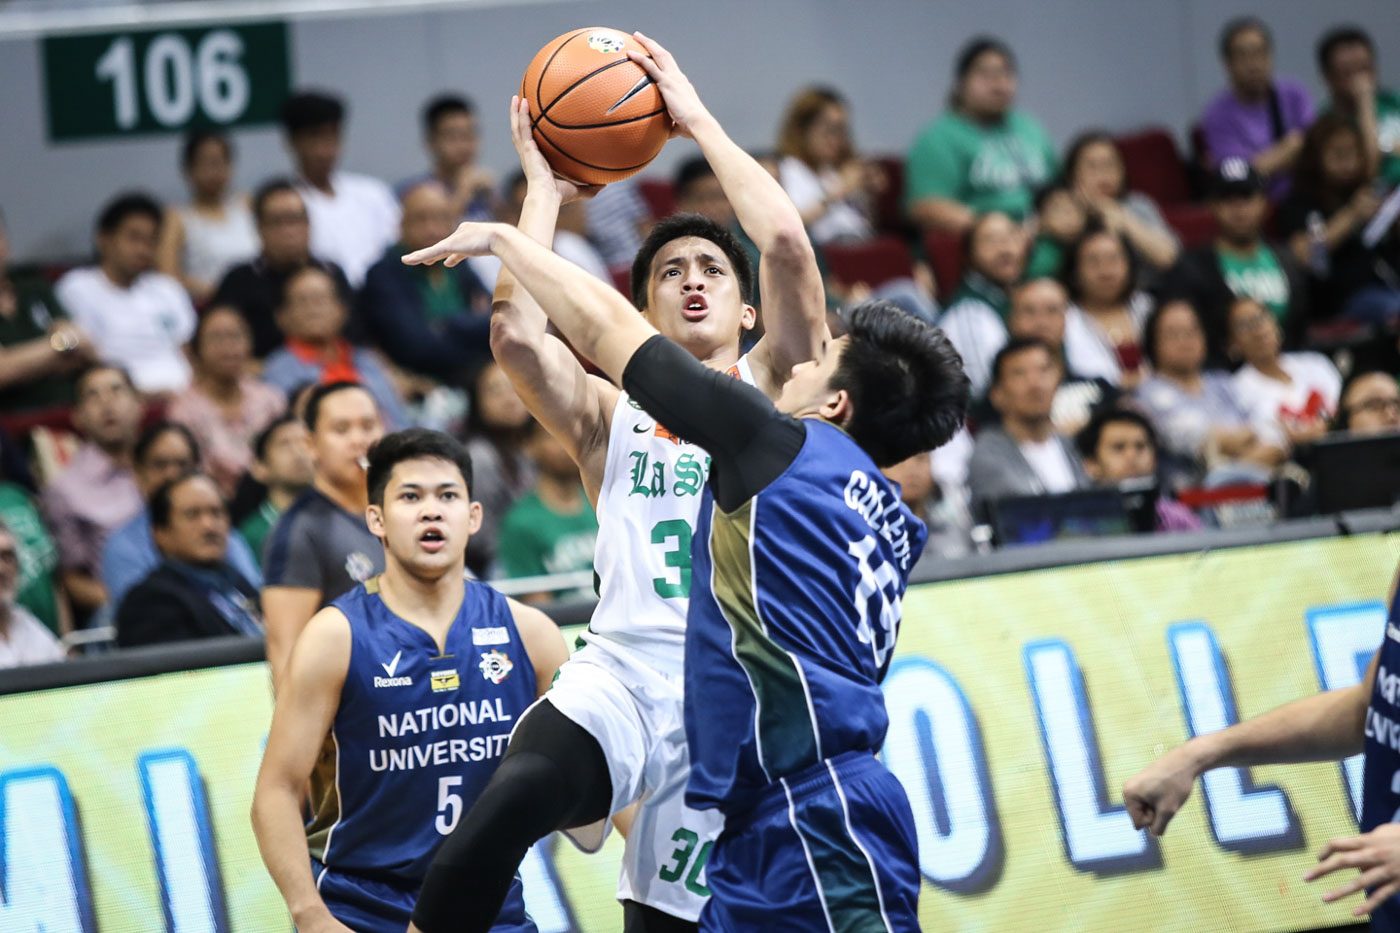 La Salle snatches first win over NU